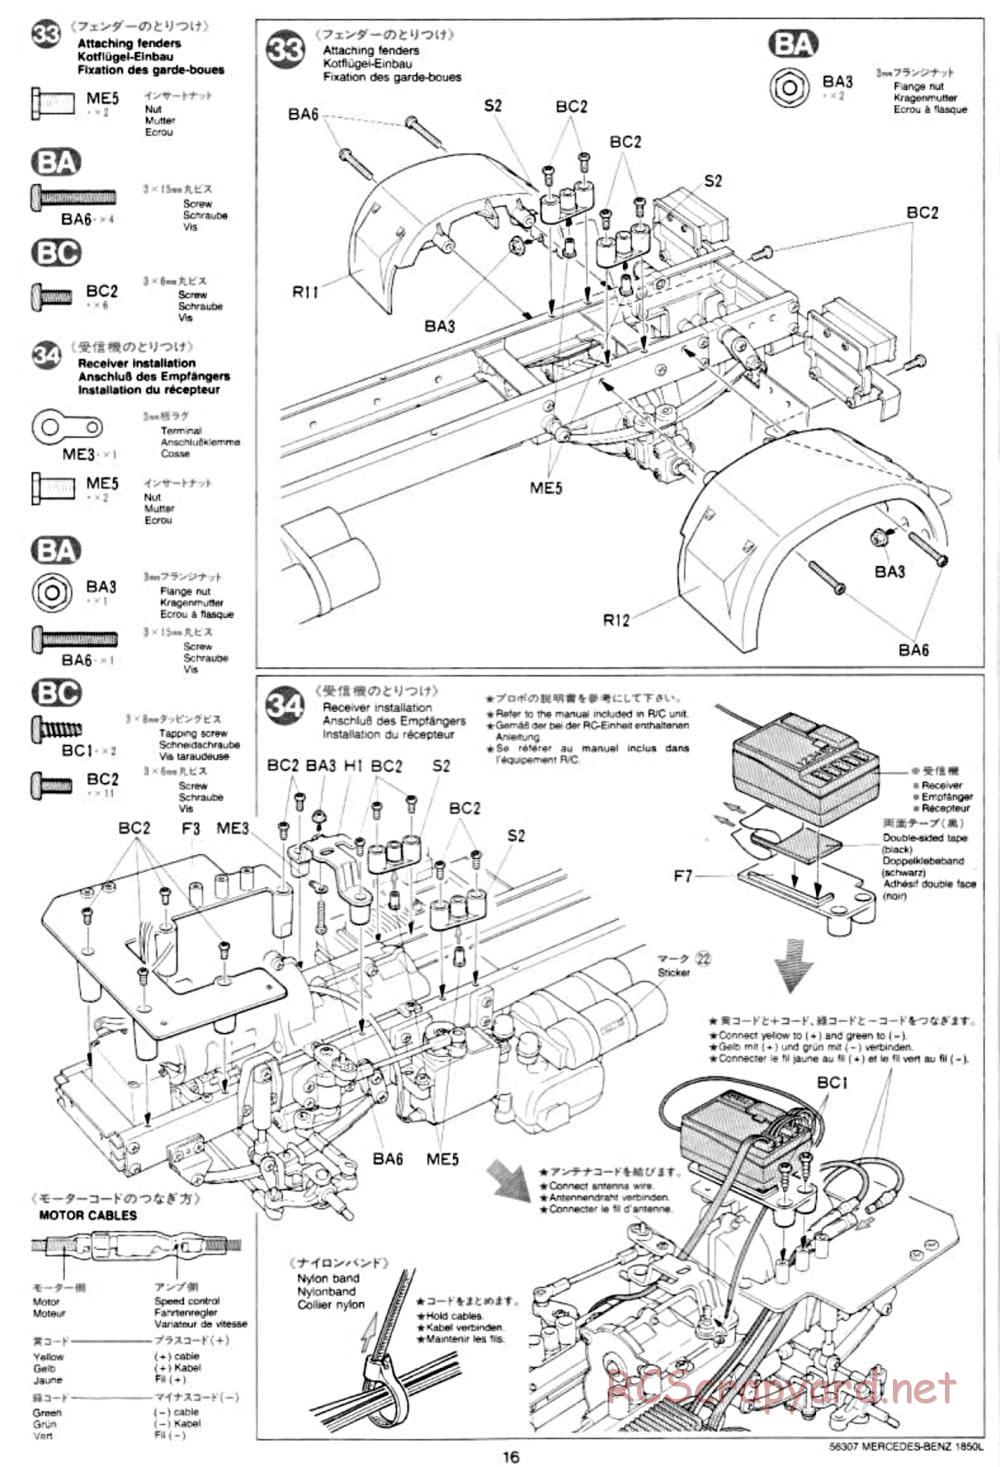 Tamiya - Mercedes-Benz 1850L Delivery Truck - Manual - Page 16